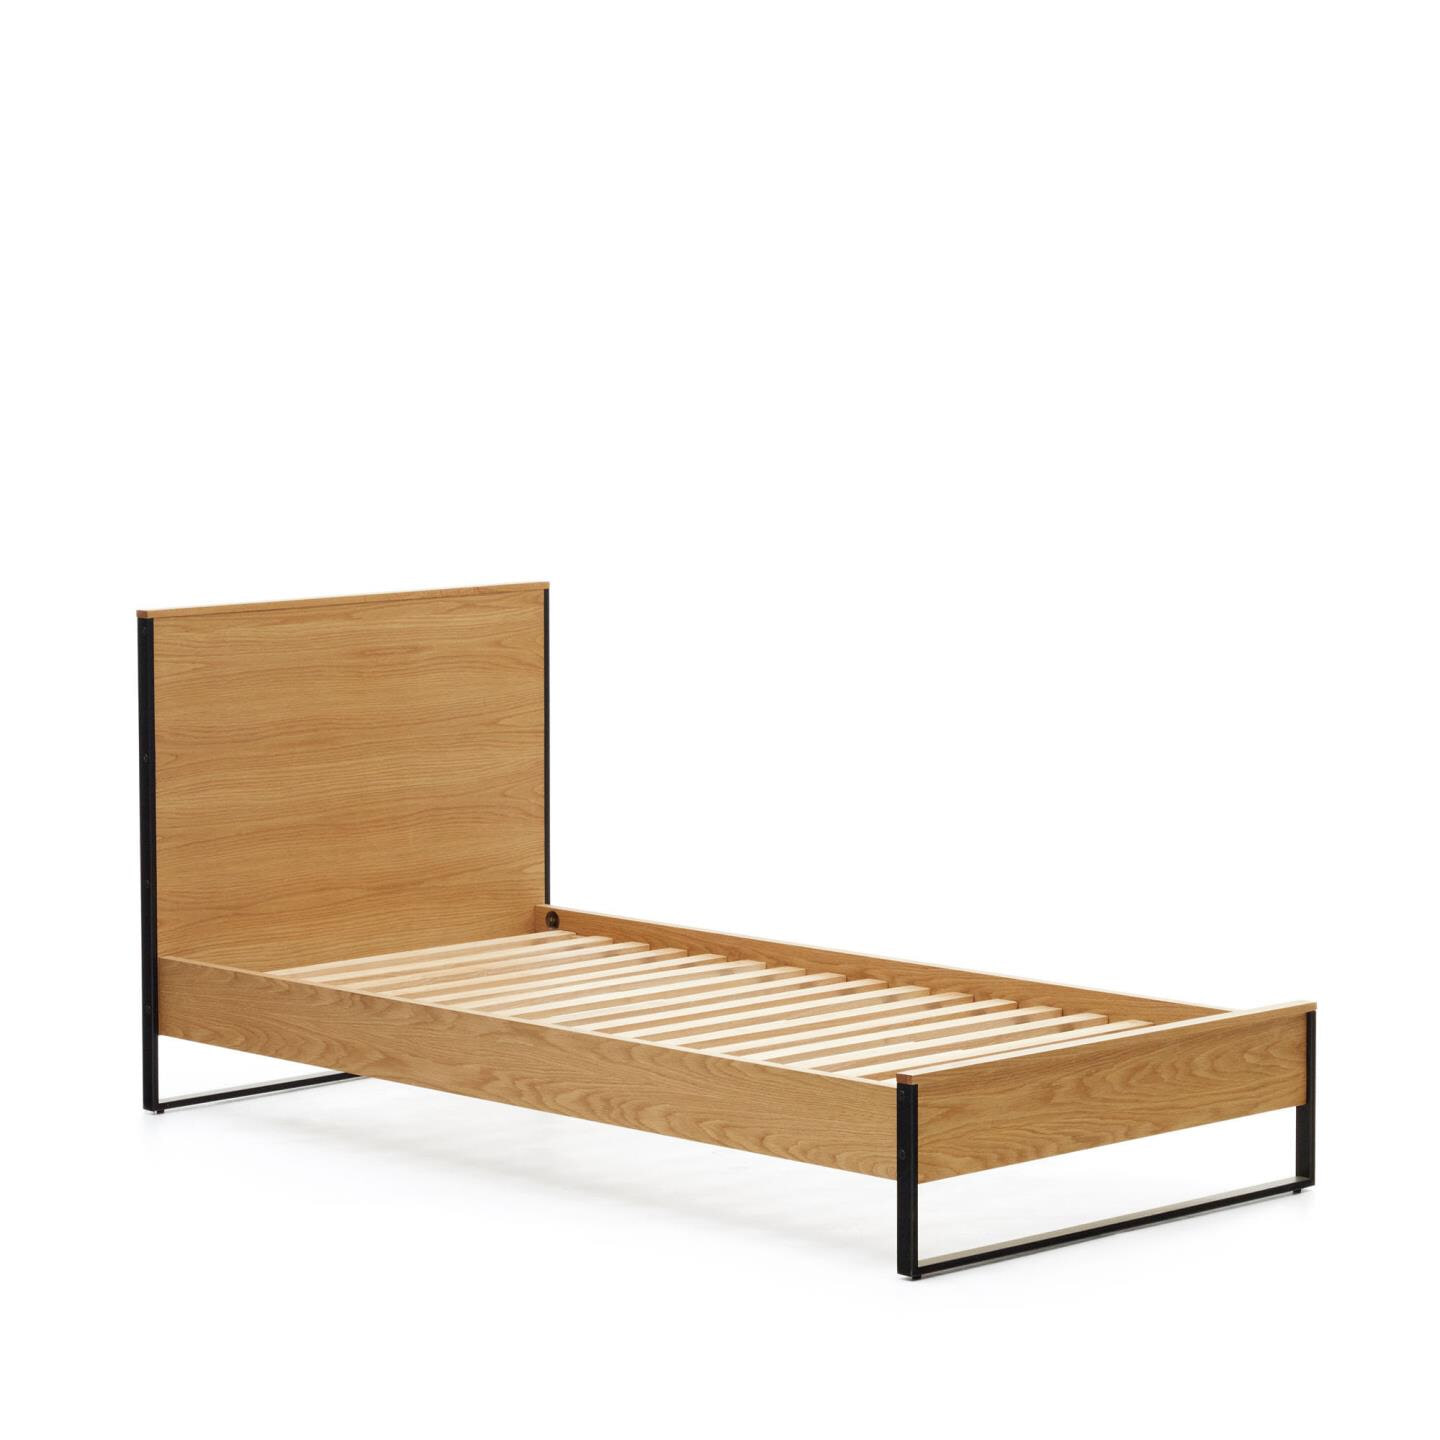 Kave Home Bed Taiana Eiken, 90 x 190cm - Bruin